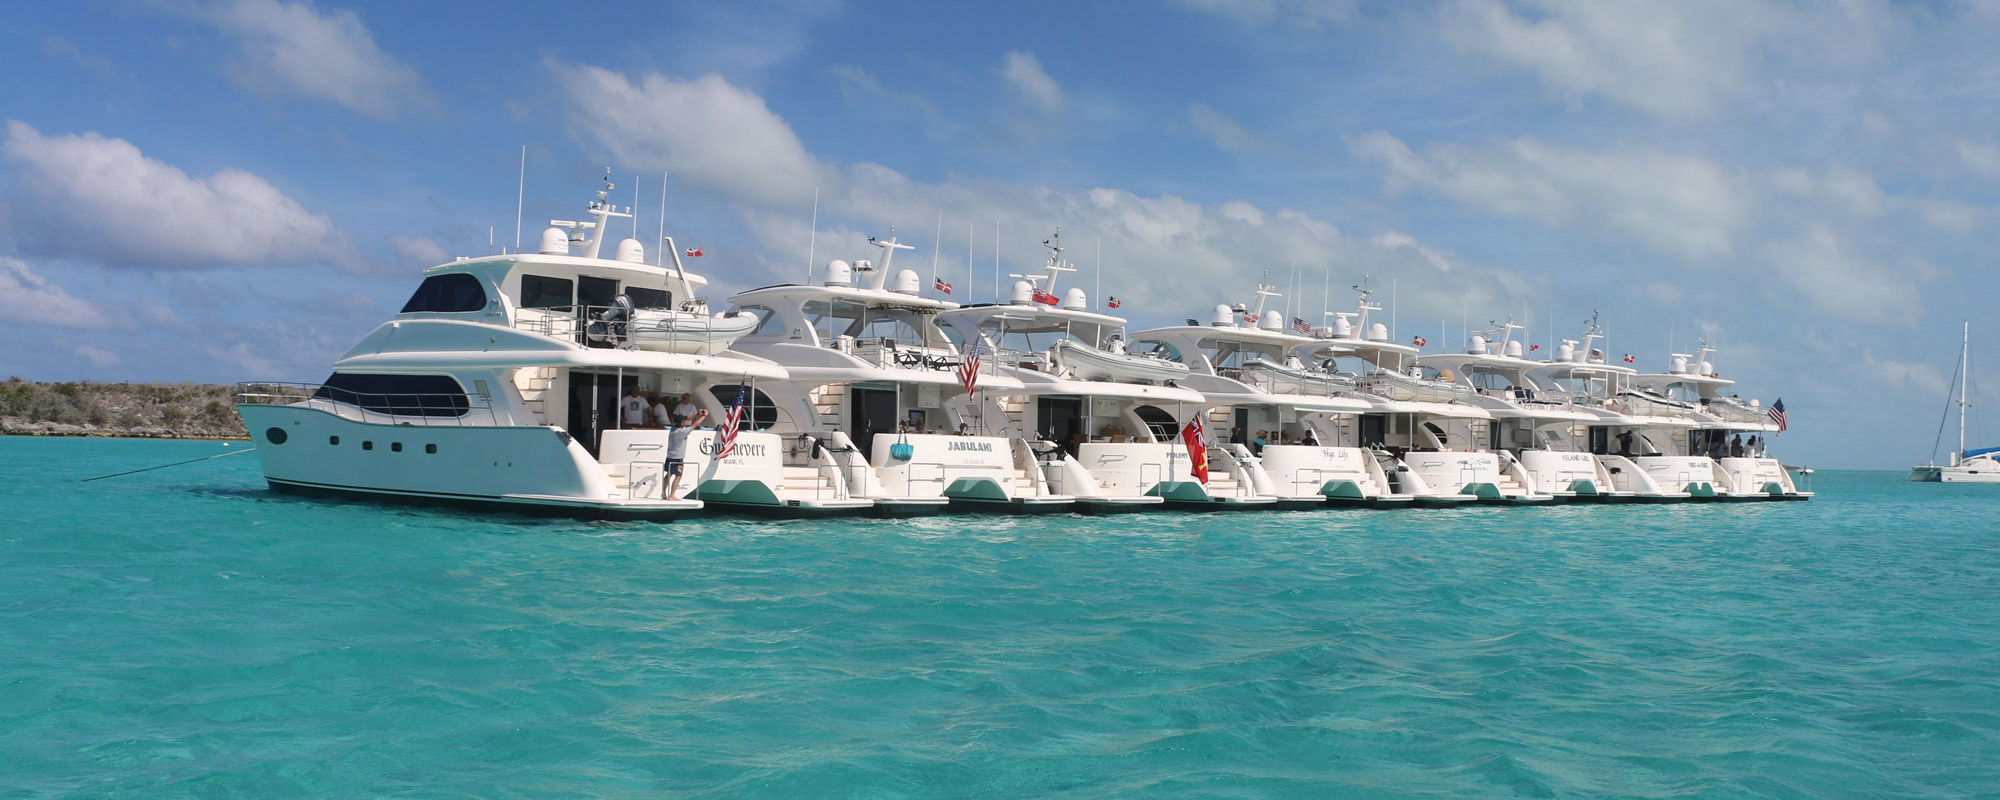 Richleigh Yachts Offering a Personal, Professional Yachting Experience